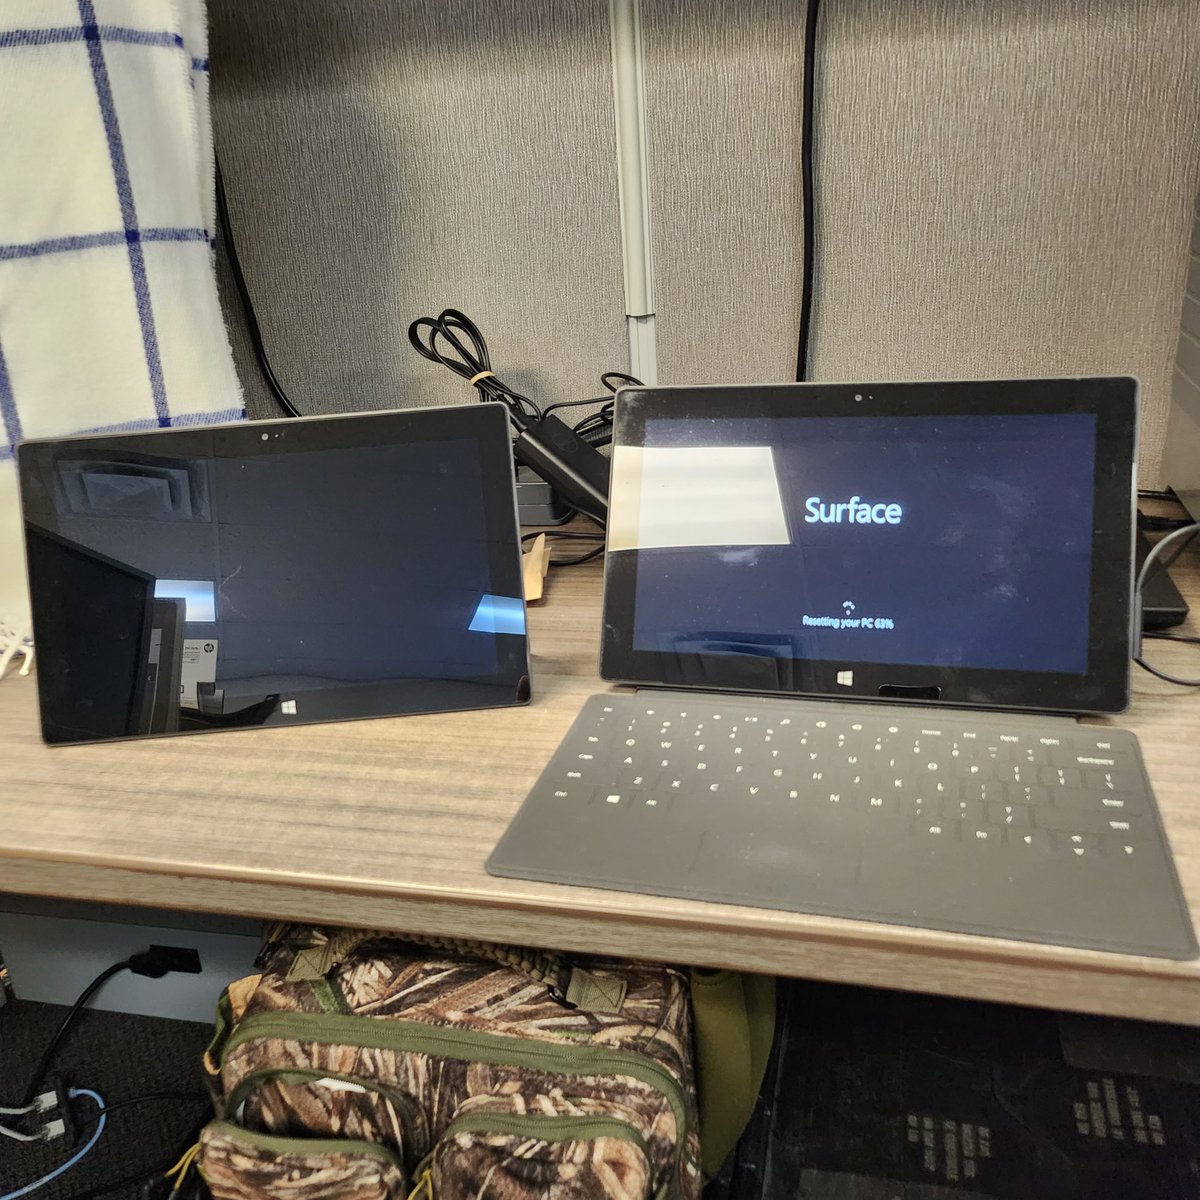 What can you do with Surface RT?